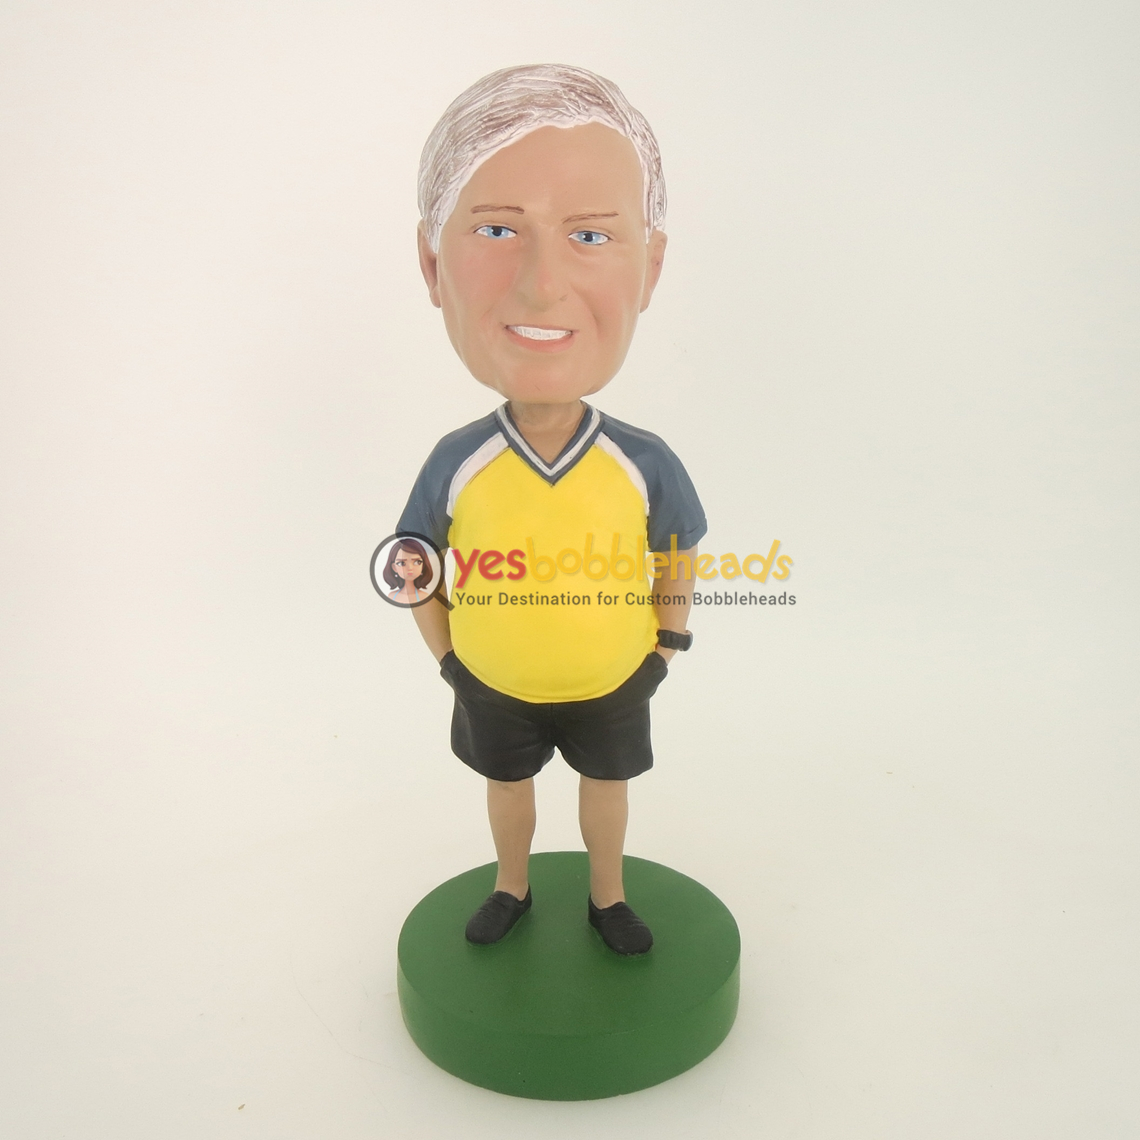 Picture of Custom Bobblehead Doll: Hands In Shorts Male